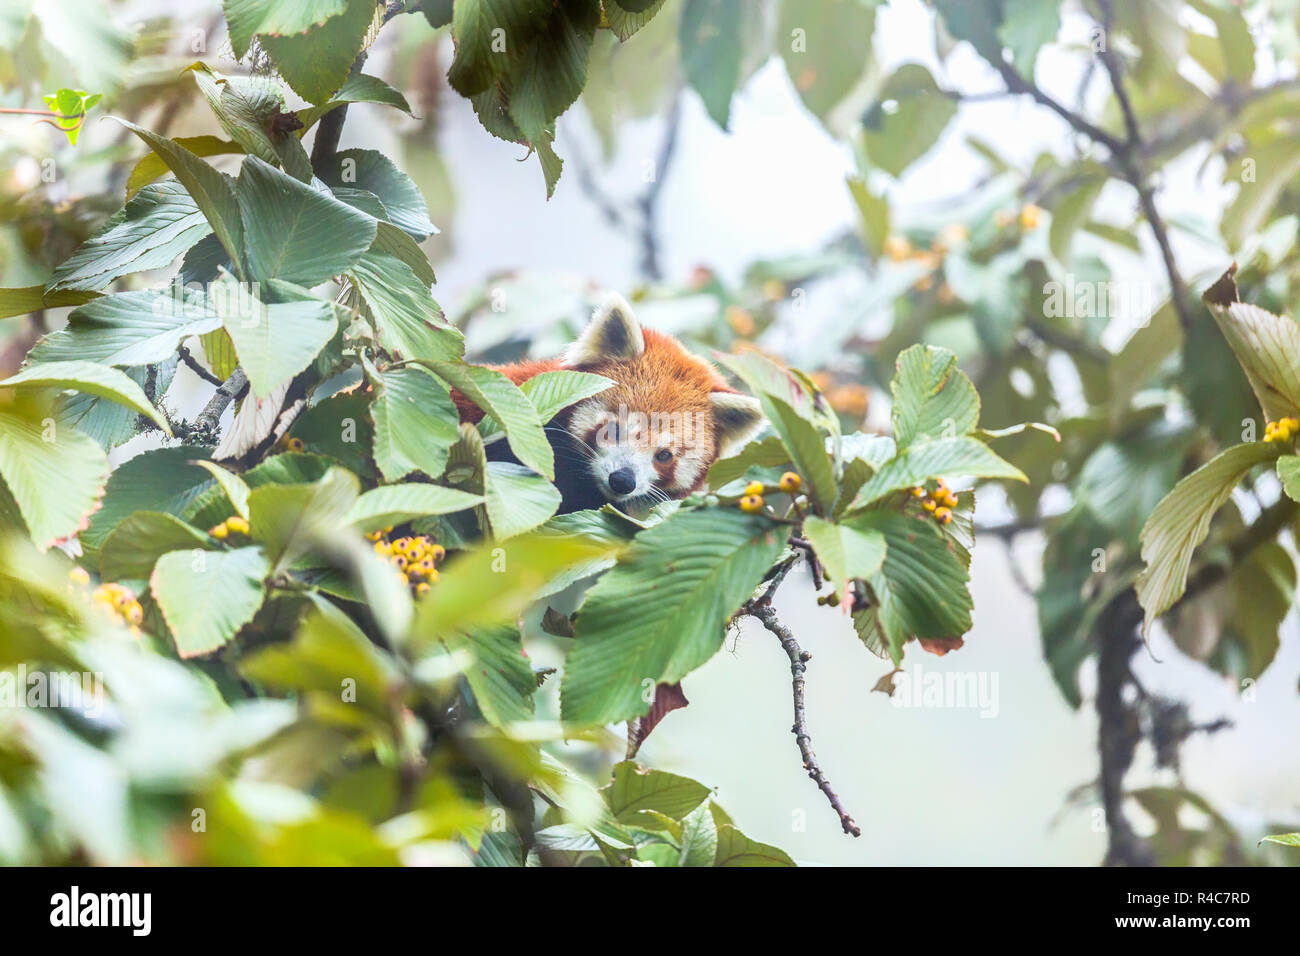 Endangered Red Panda  or Ailurus fulgens in Wild at Singalila National Park in Indo-Nepal region Stock Photo